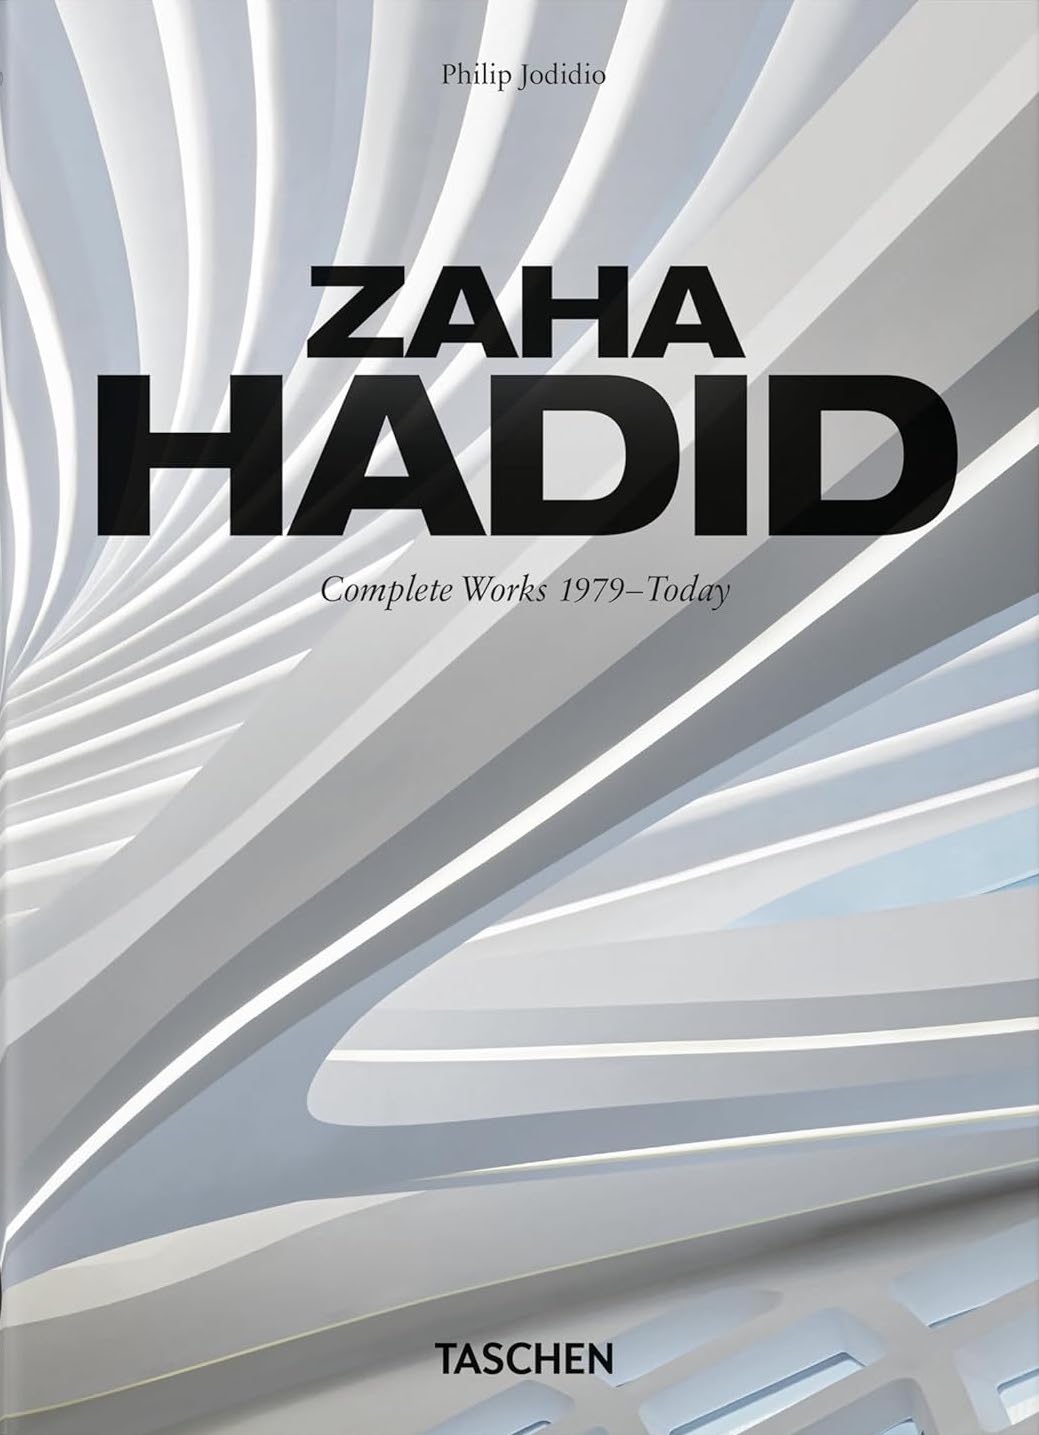 Zaha Hadid. Complete Works 1975-Today 40th Edt.